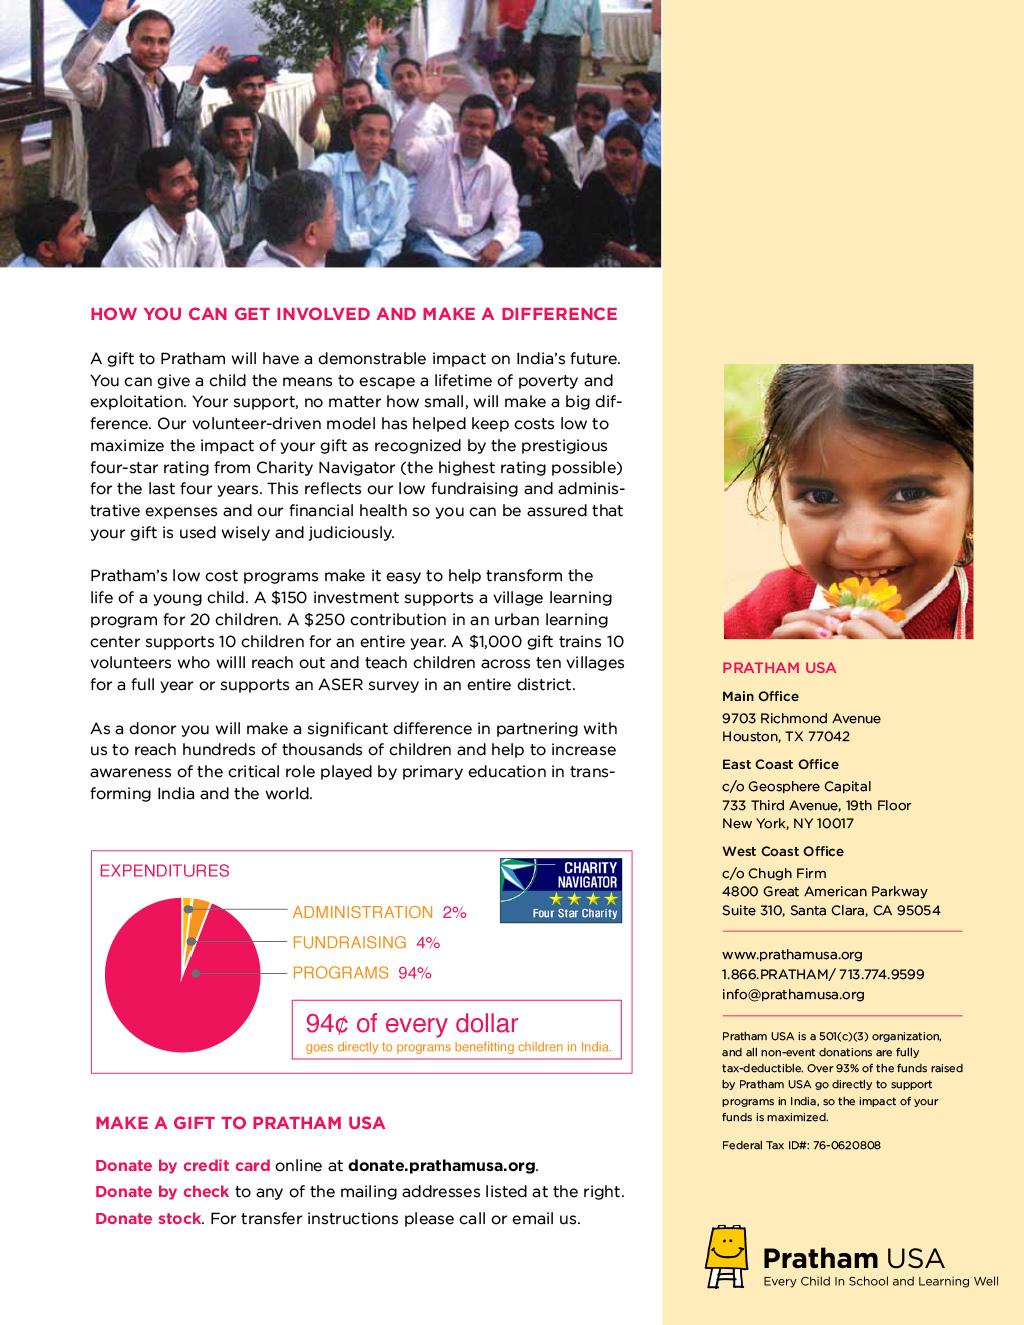 pratham-usas-call-for-donations-in-their-case-for